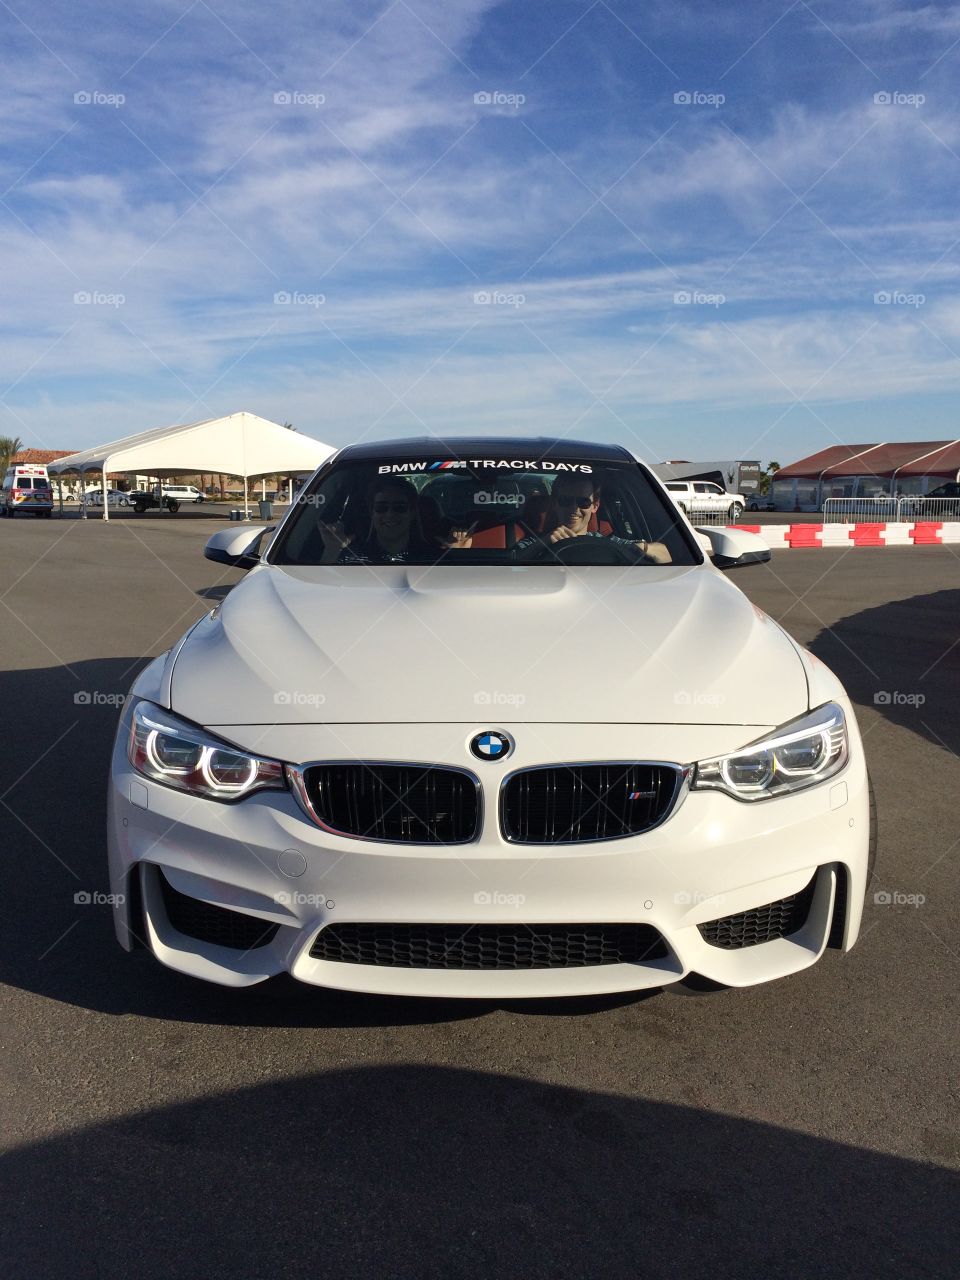 BMW M3 at Thermal Club. BMW Performance Driving School in Thermal California